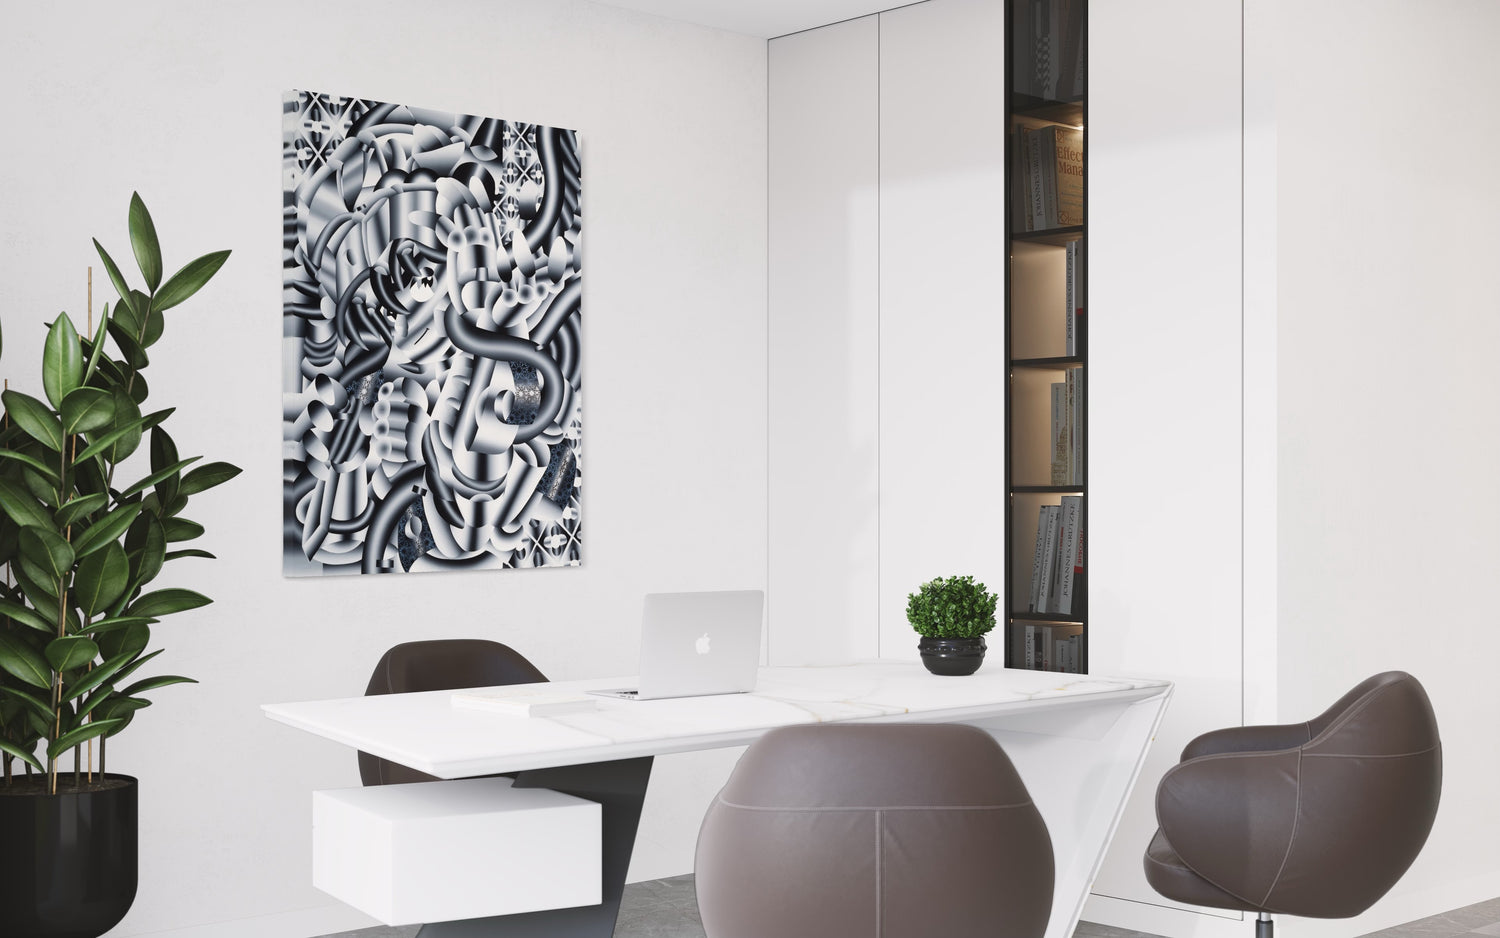 Build a Corporate Art Collection That Communicates Your Brand's Vision